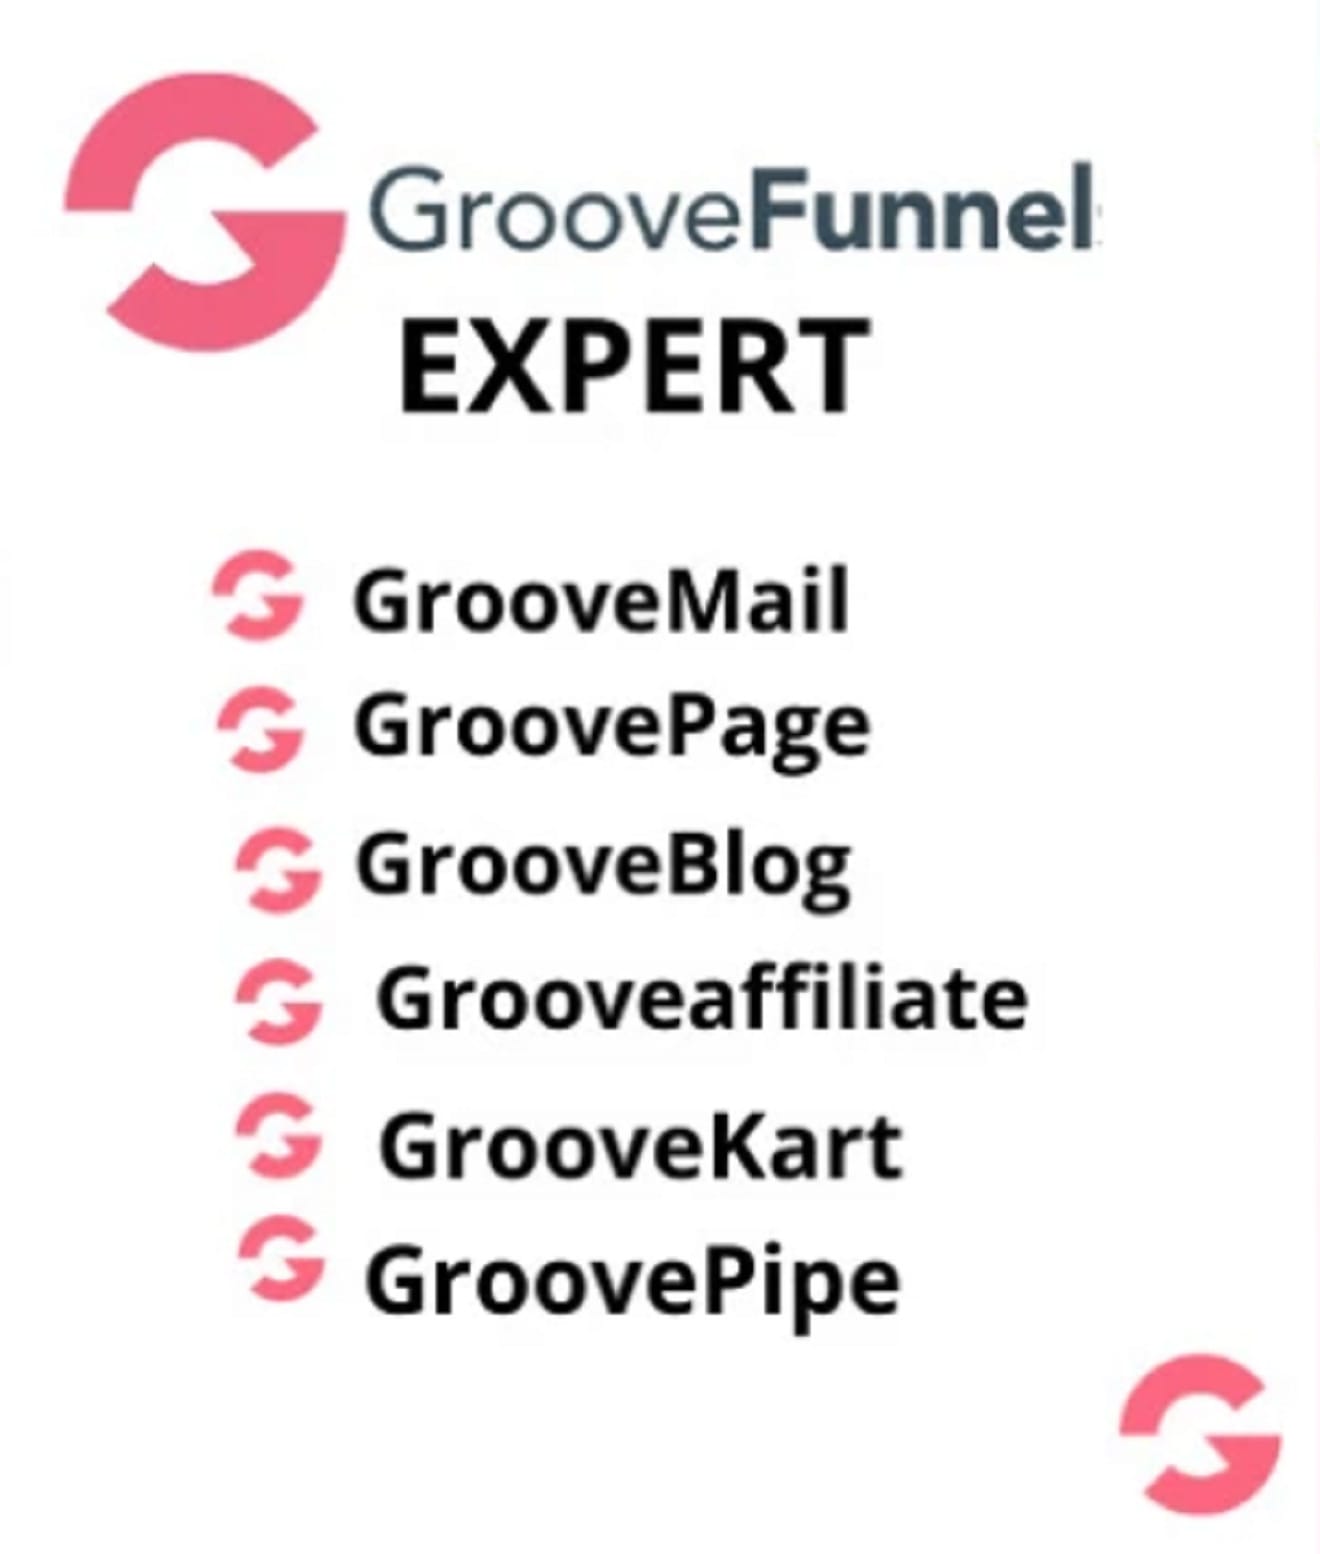 Design your groove pages, groove funnels, groove sell funnel and groove  kart by Tdakwrite - Fiverr